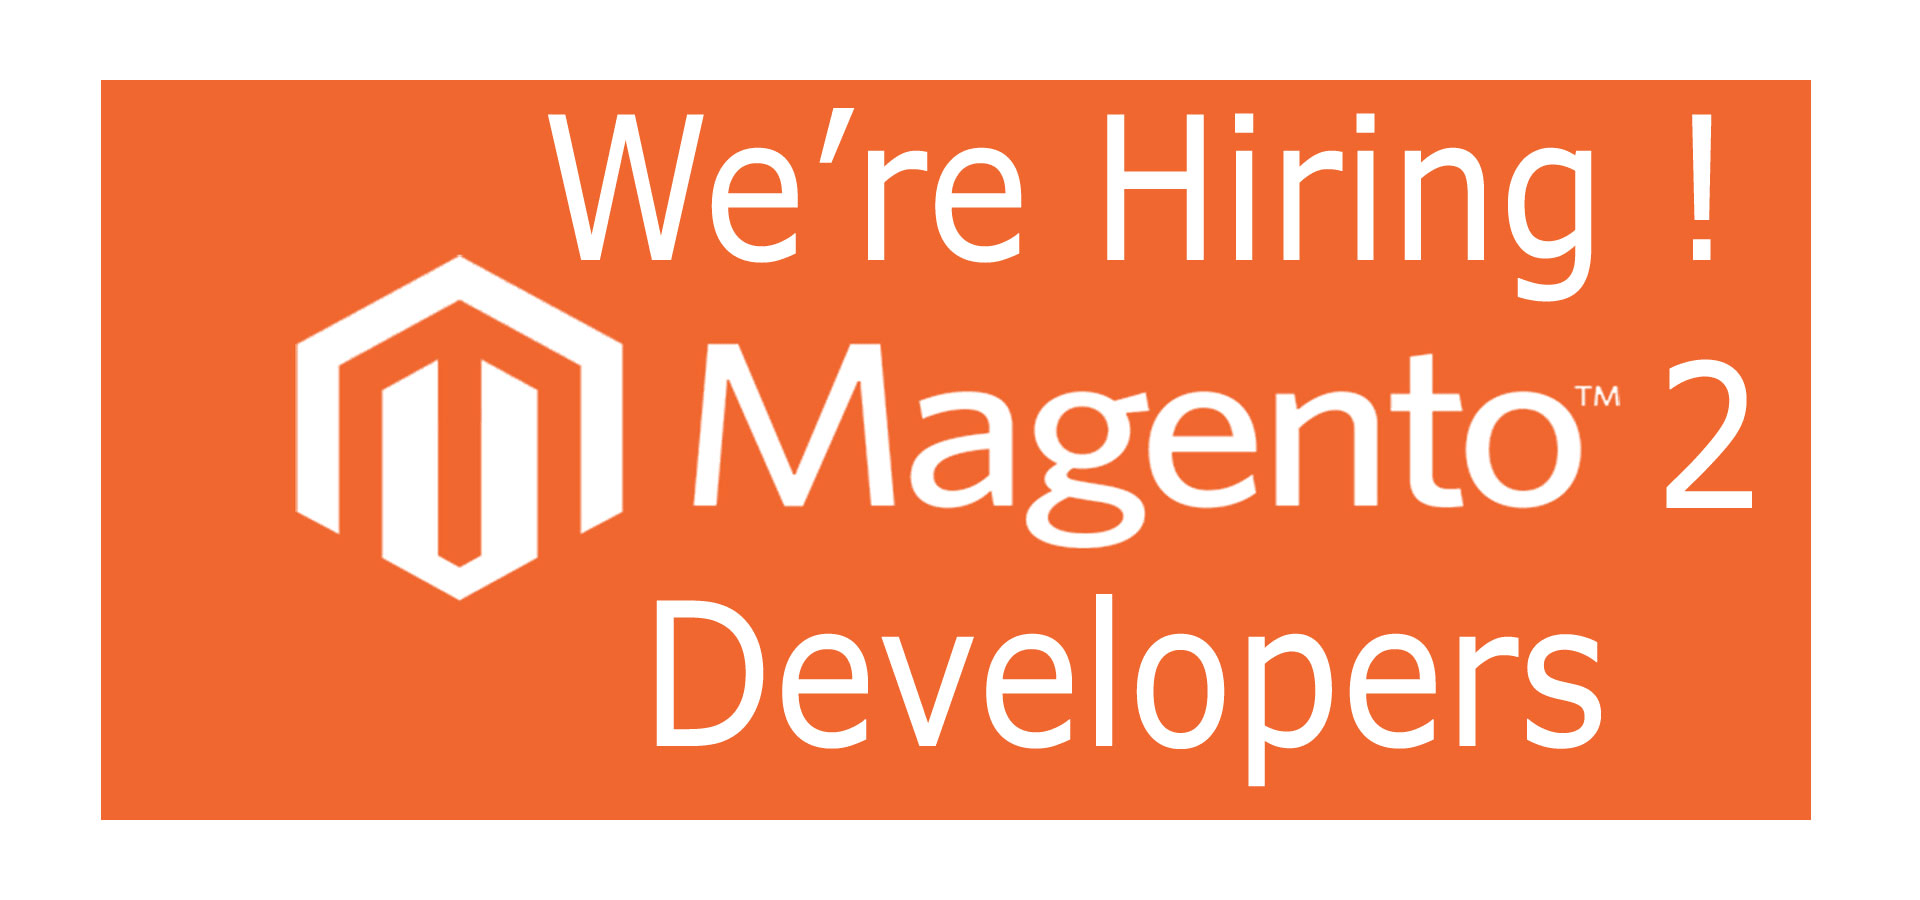 We are hiring Magento 2 developers